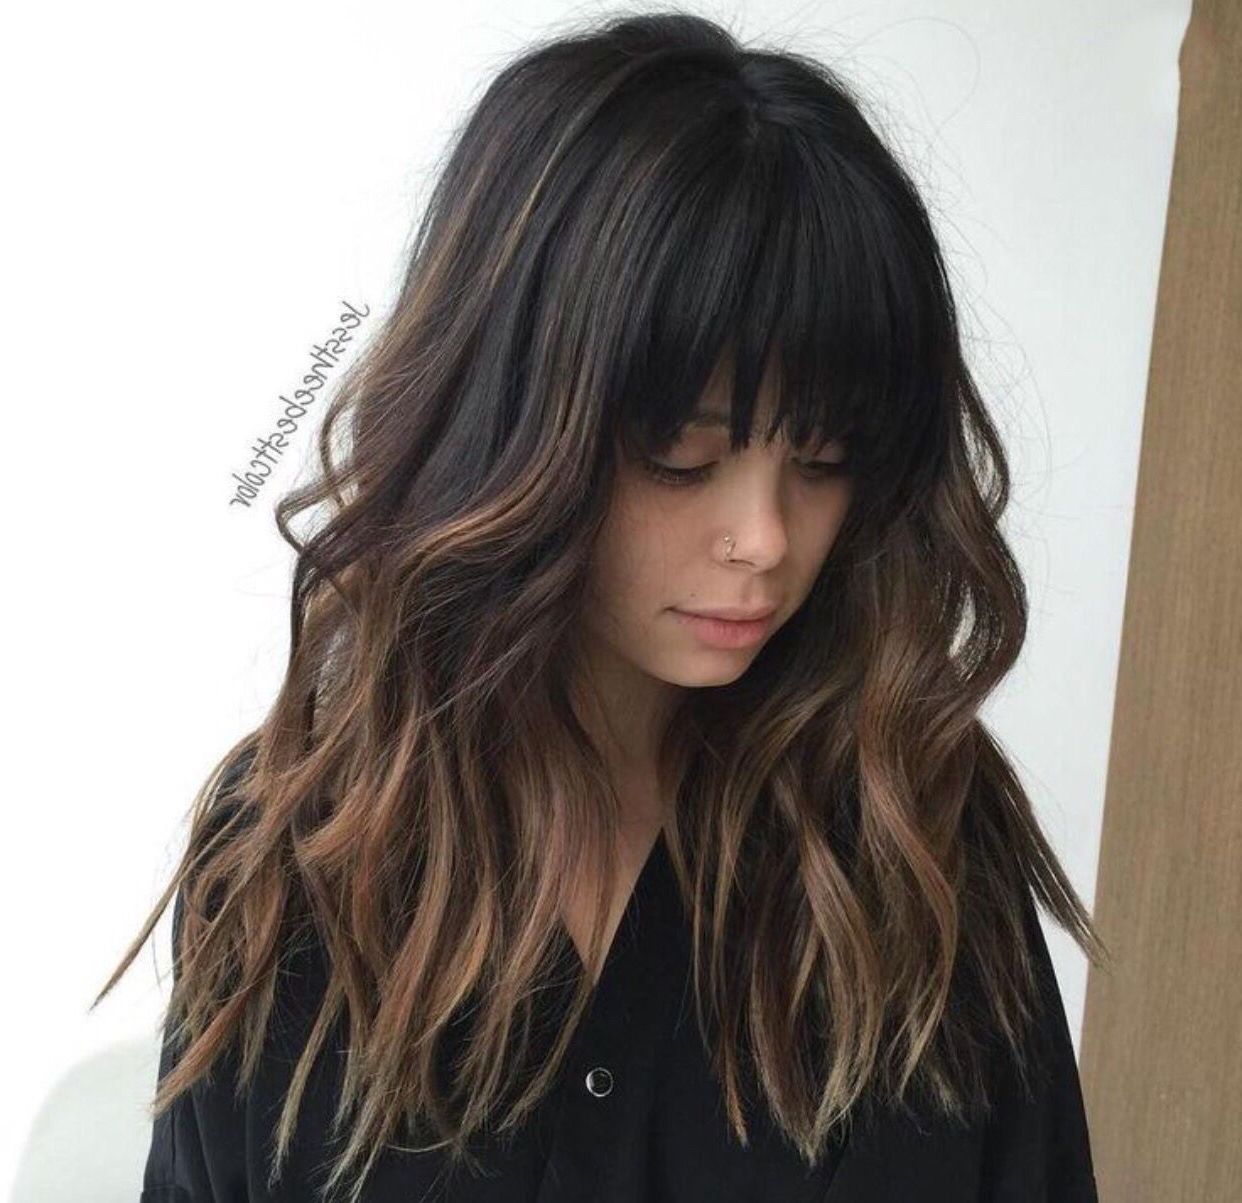 Most Current Black To Light Brown Ombre Waves Hairstyles With Black Hair, With Bangs, And Some Ombré, With Beach Waves (Gallery 20 of 20)